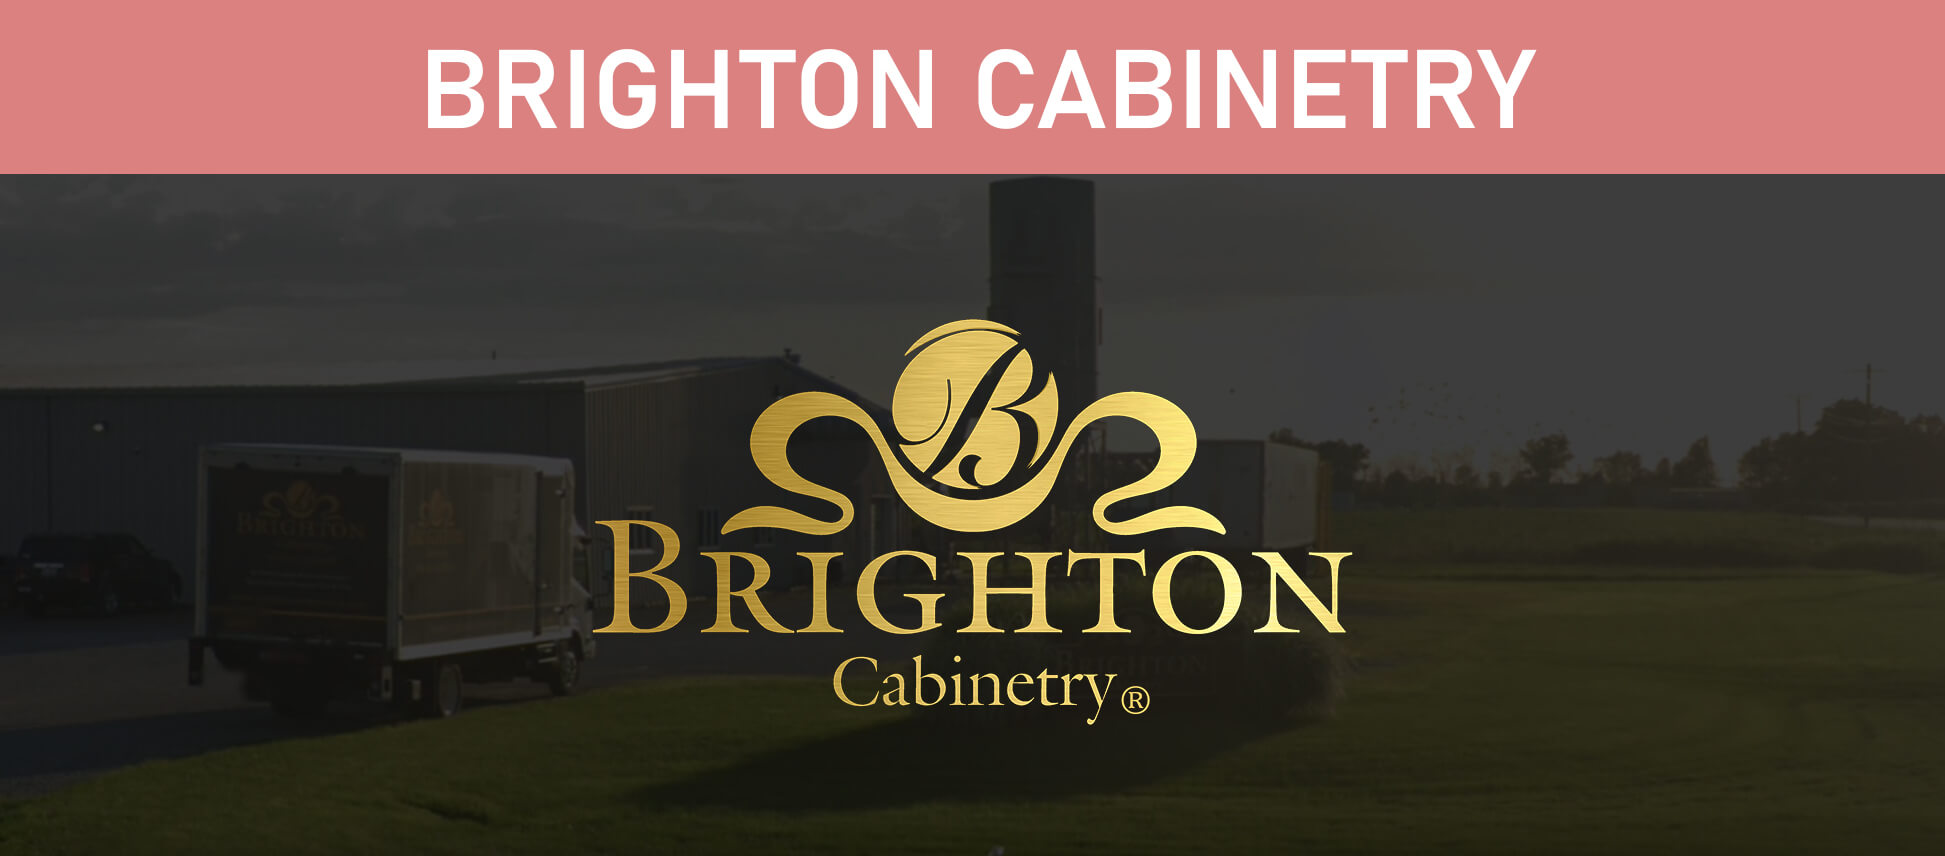 Brighton Cabinetry Featured image